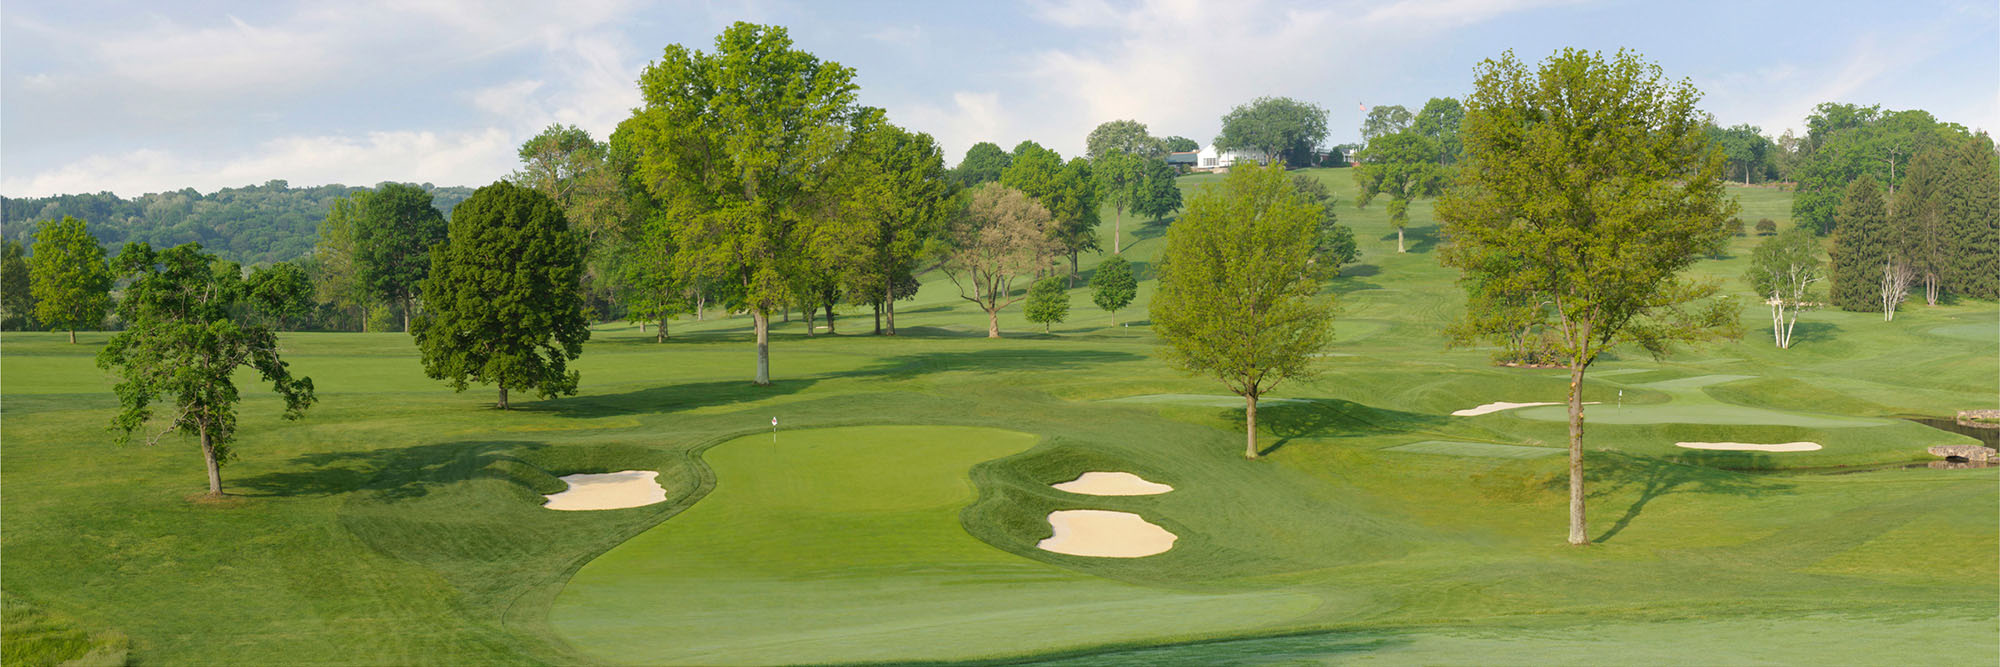 Golf Course Image - Pittsburgh Field Club No. 9